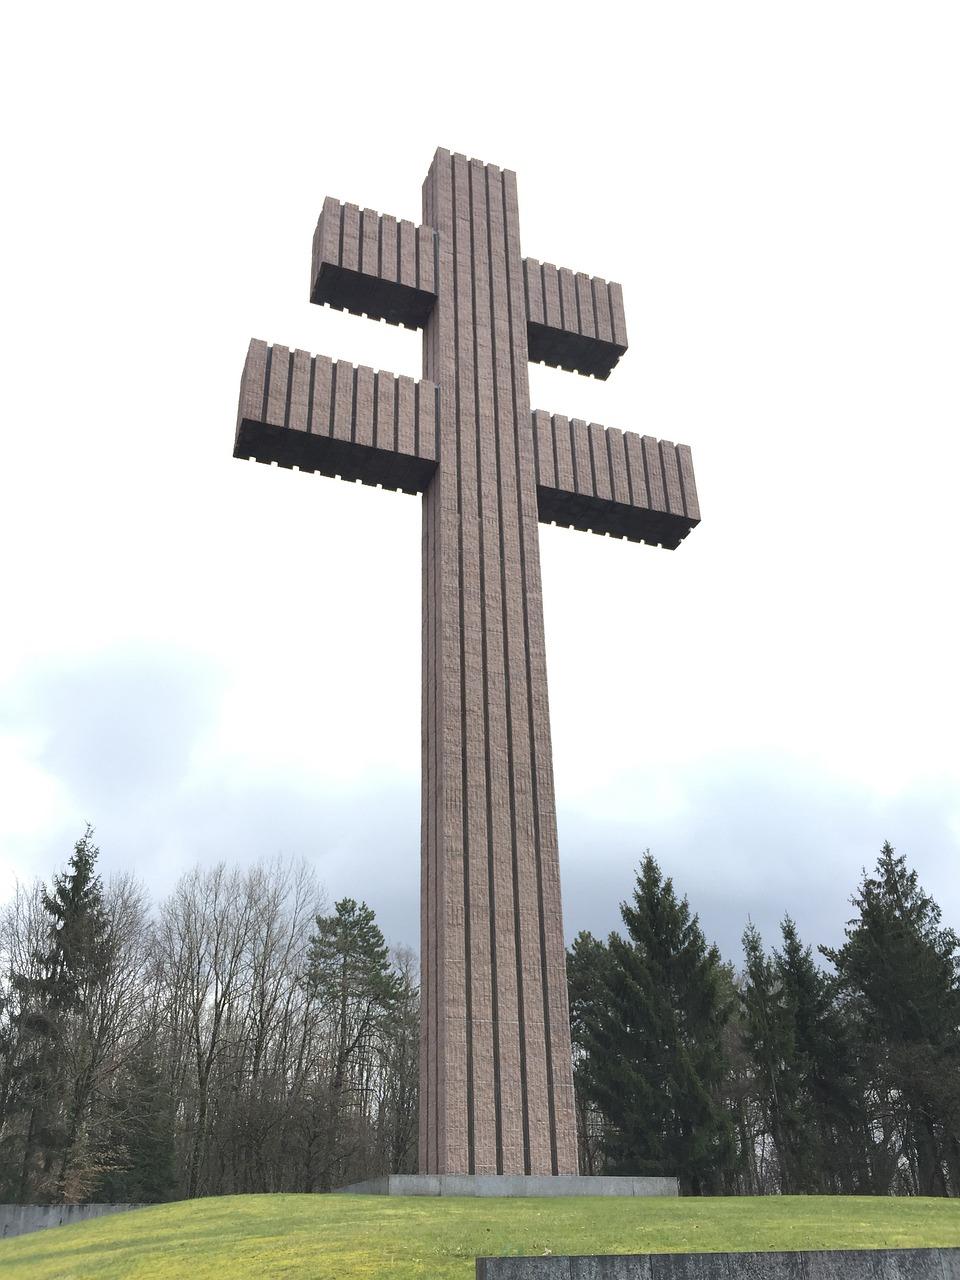 What is the significance of the cross of Lorraine? 